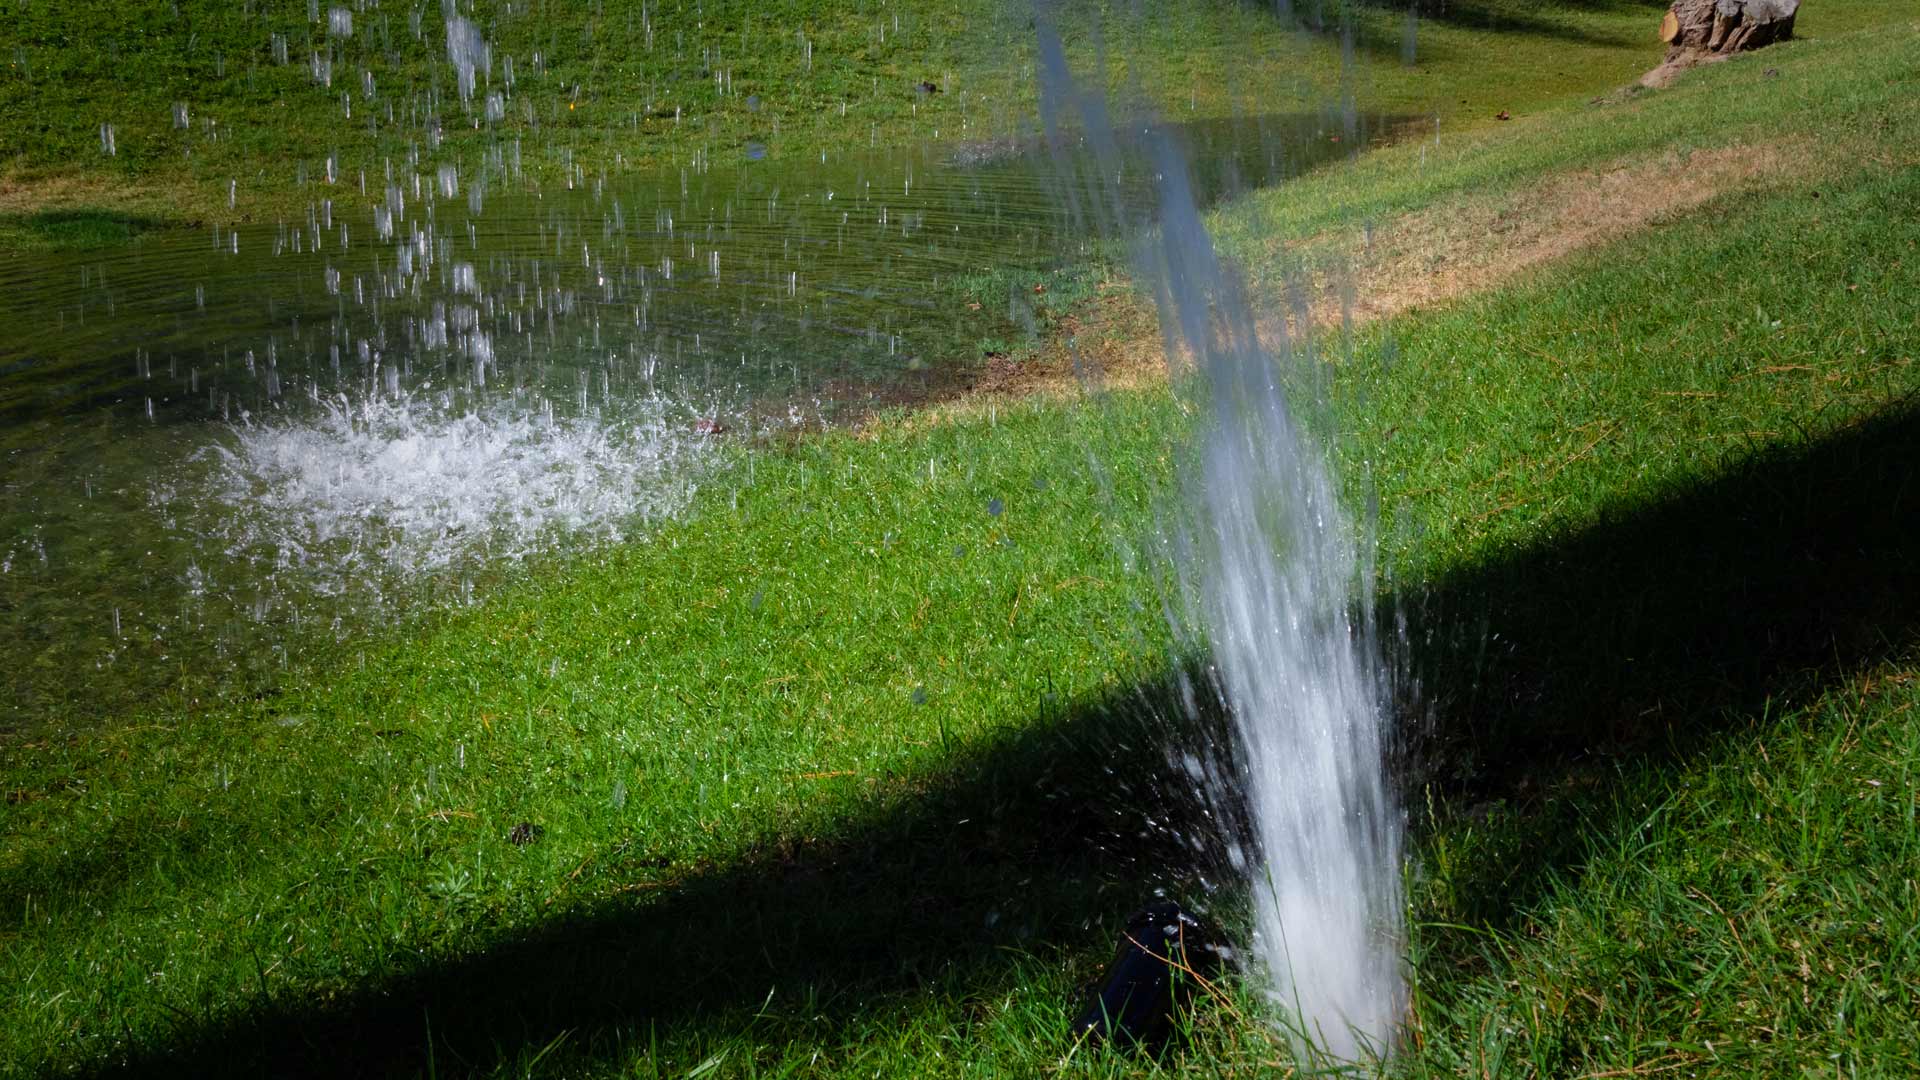 DIY Irrigation Repair Can Be a Big Mistake - Always Hire Pros